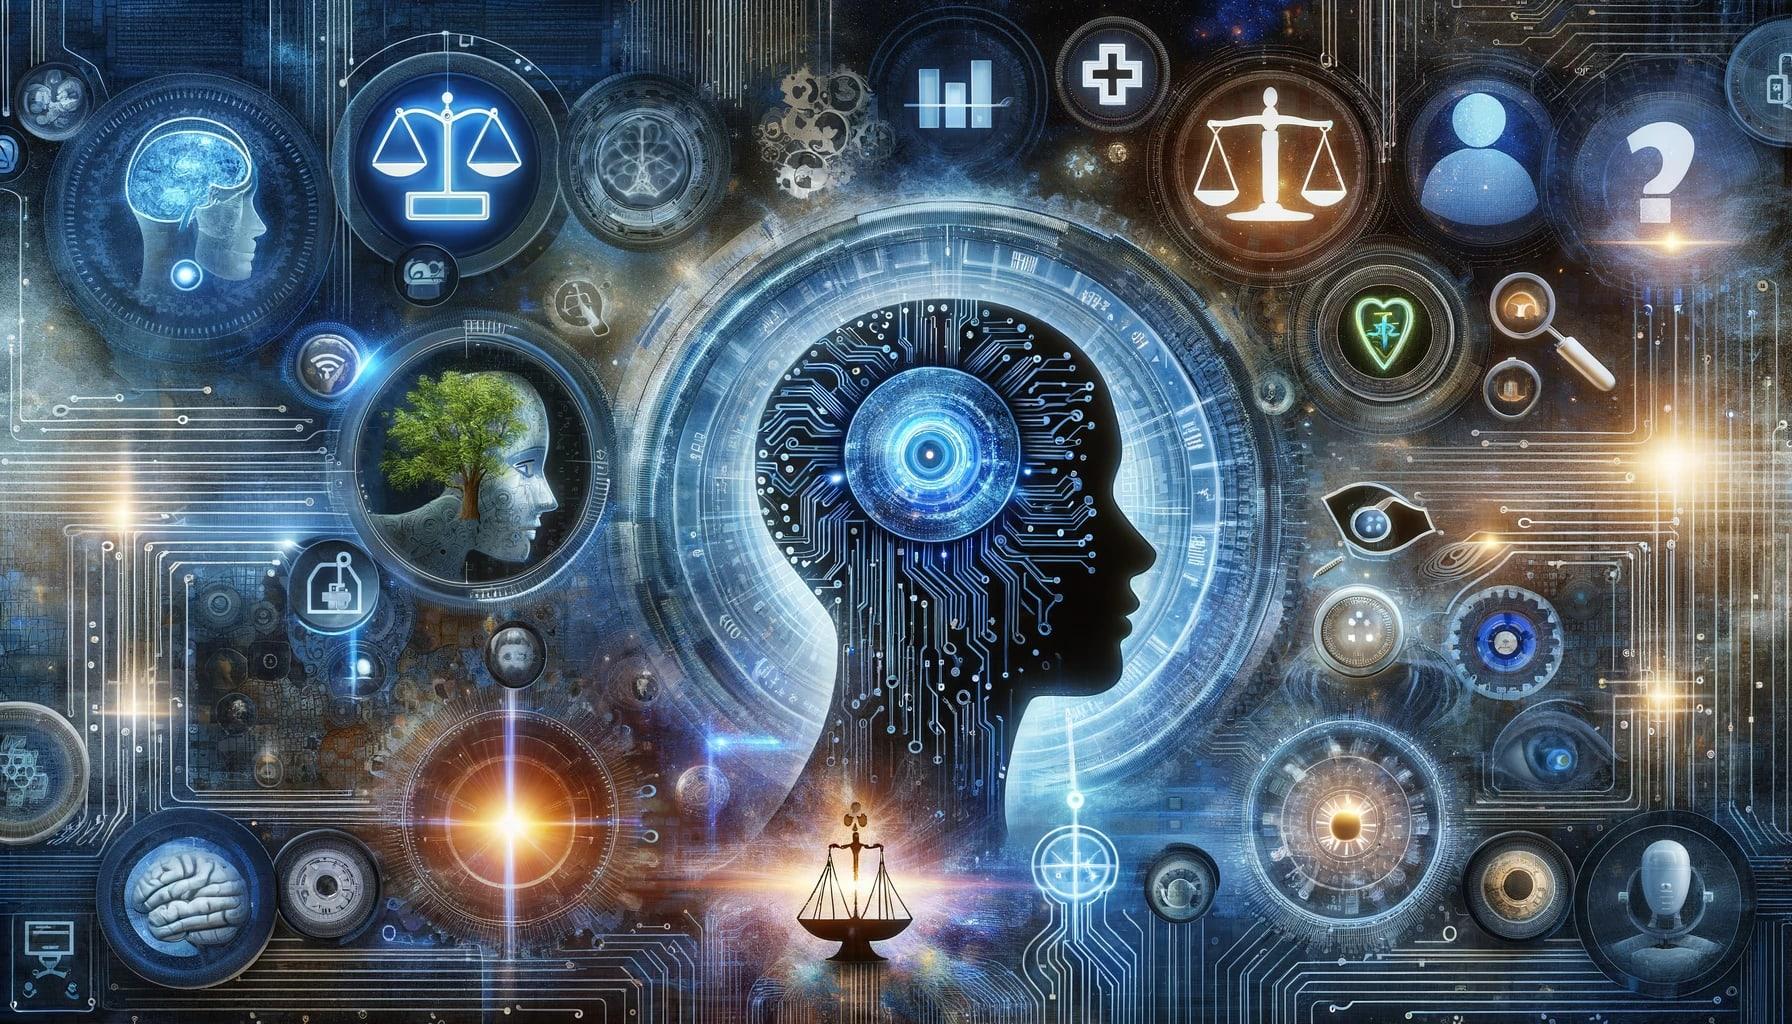 Explore the intersection of artificial intelligence and human ethics with this visually captivating image. Featuring a human silhouette filled with intricate digital circuits, this artwork represents the fusion of AI technology with human-centric values. The surrounding icons symbolize balance, growth, health, and inquiry, highlighting the multifaceted impact of AI on society.